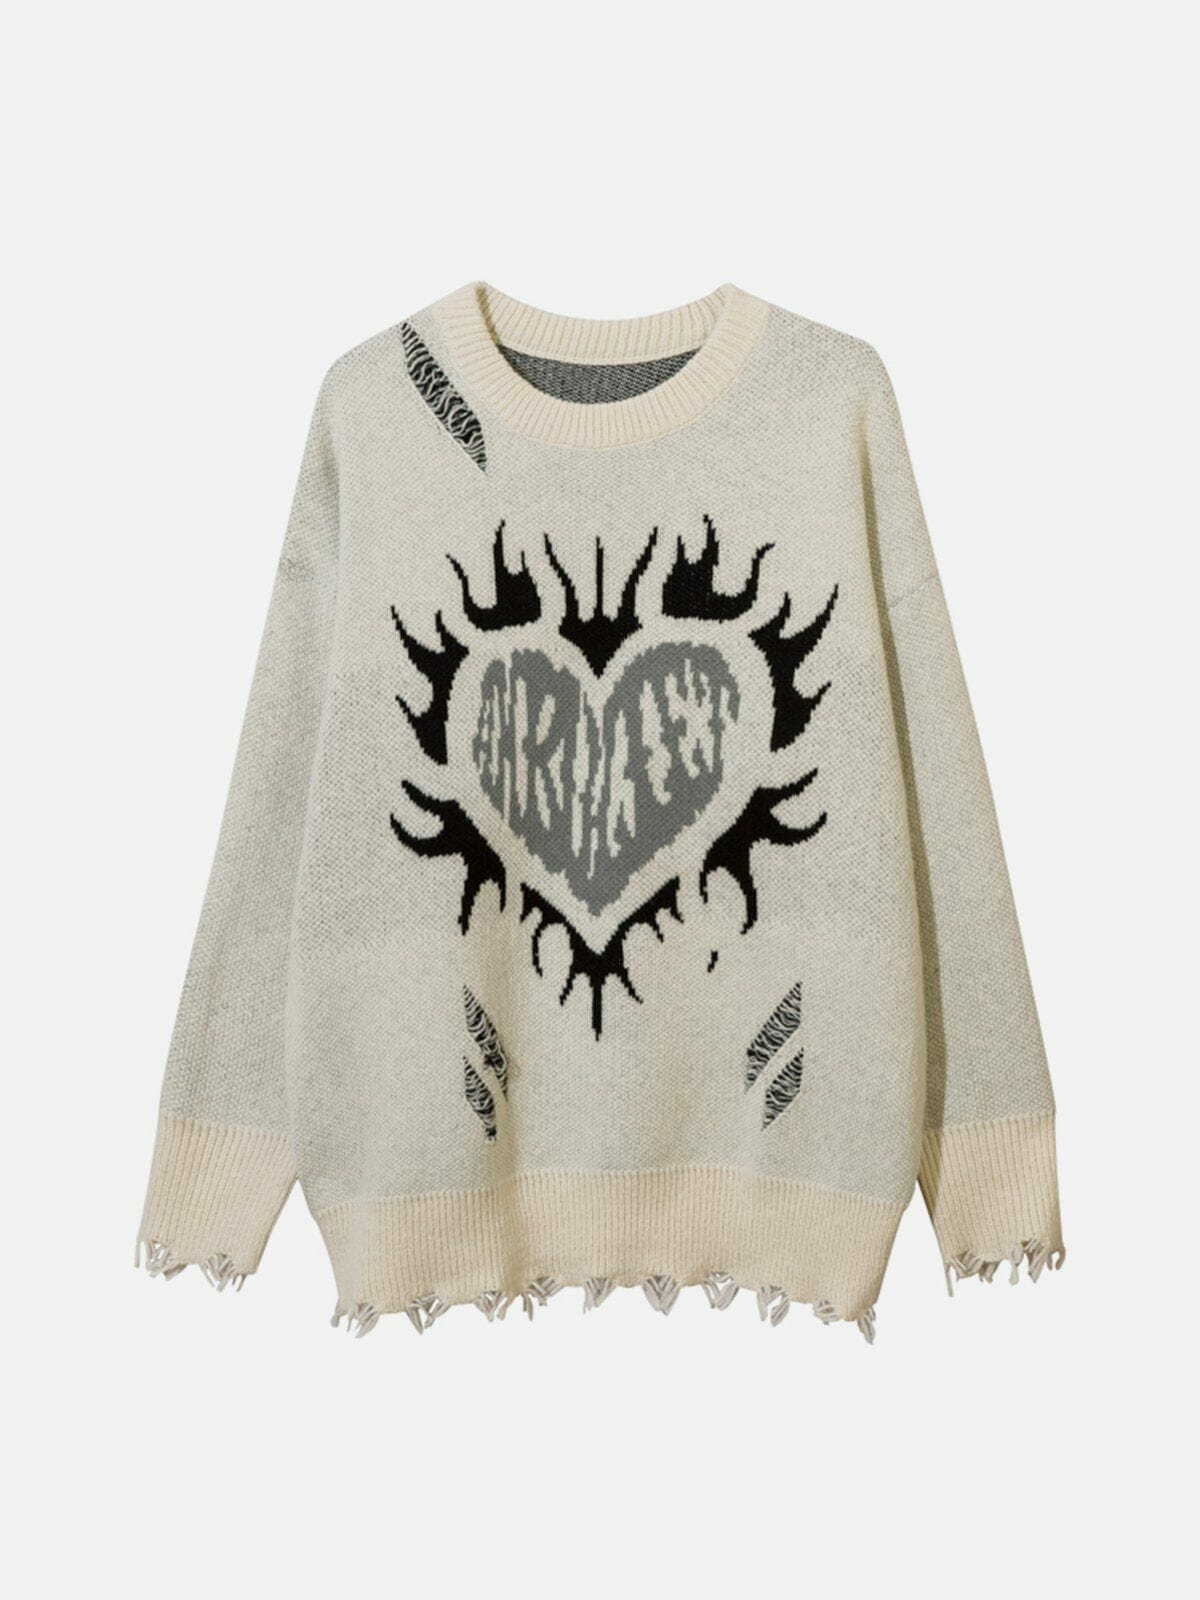 flame heart jacquard sweater edgy retro knitwear chic 5688